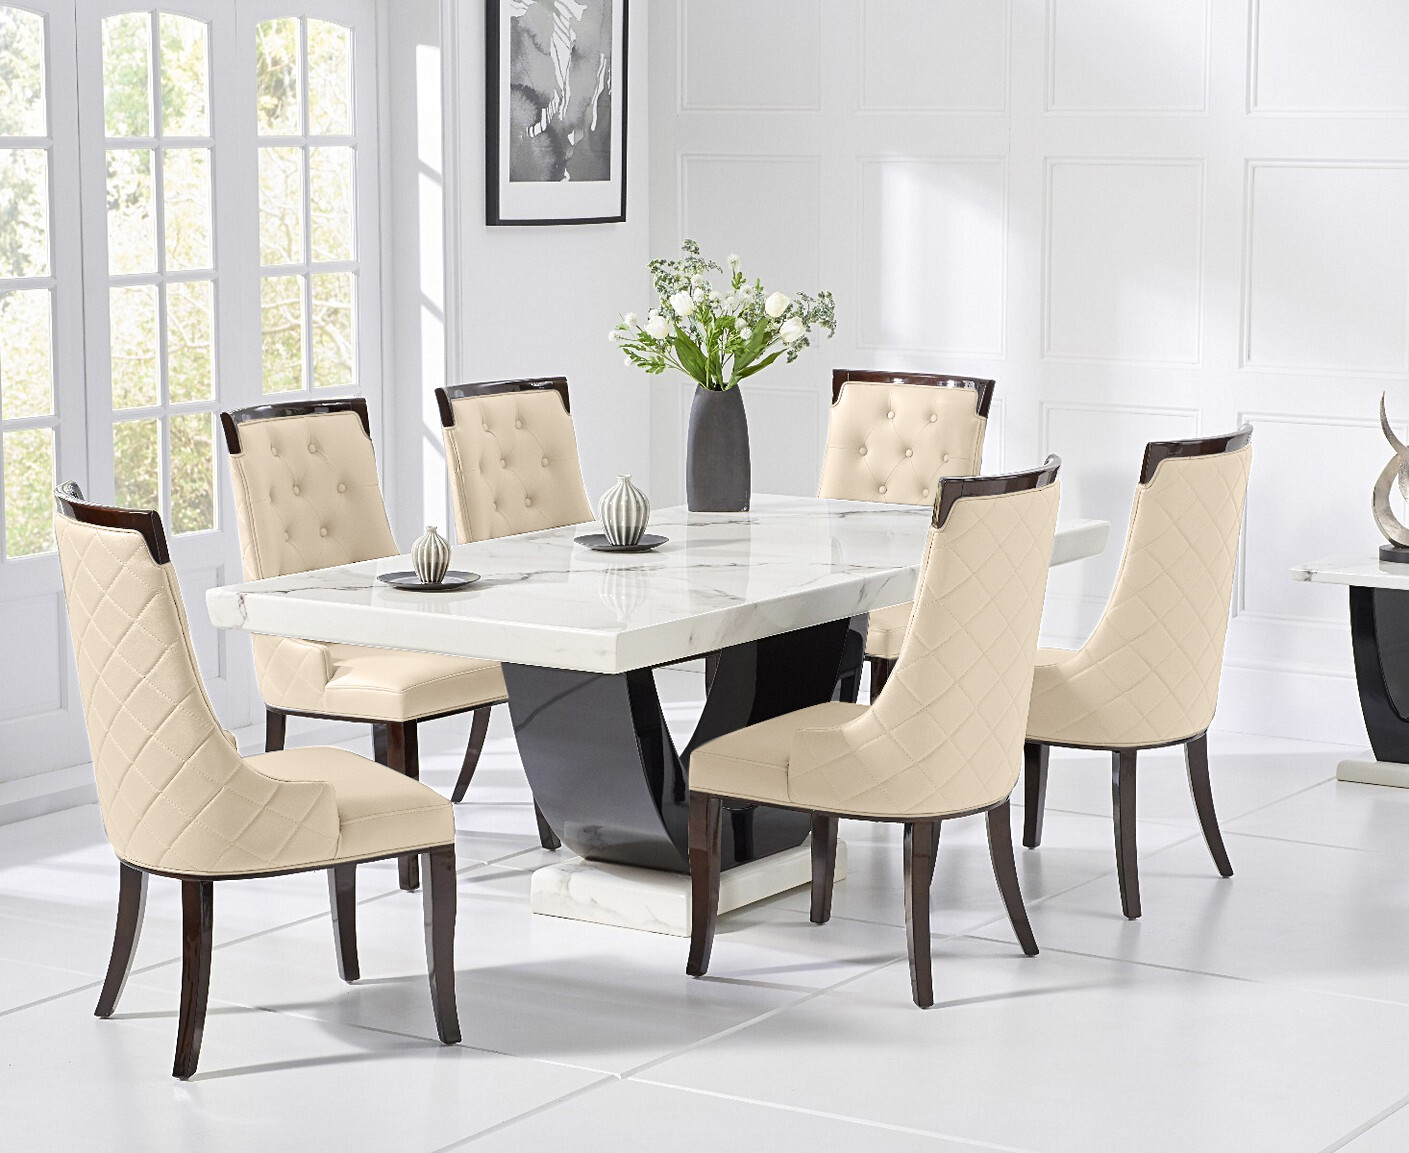 Photo 3 of Raphael 200cm white and black pedestal marble dining table with 6 grey francesca chairs